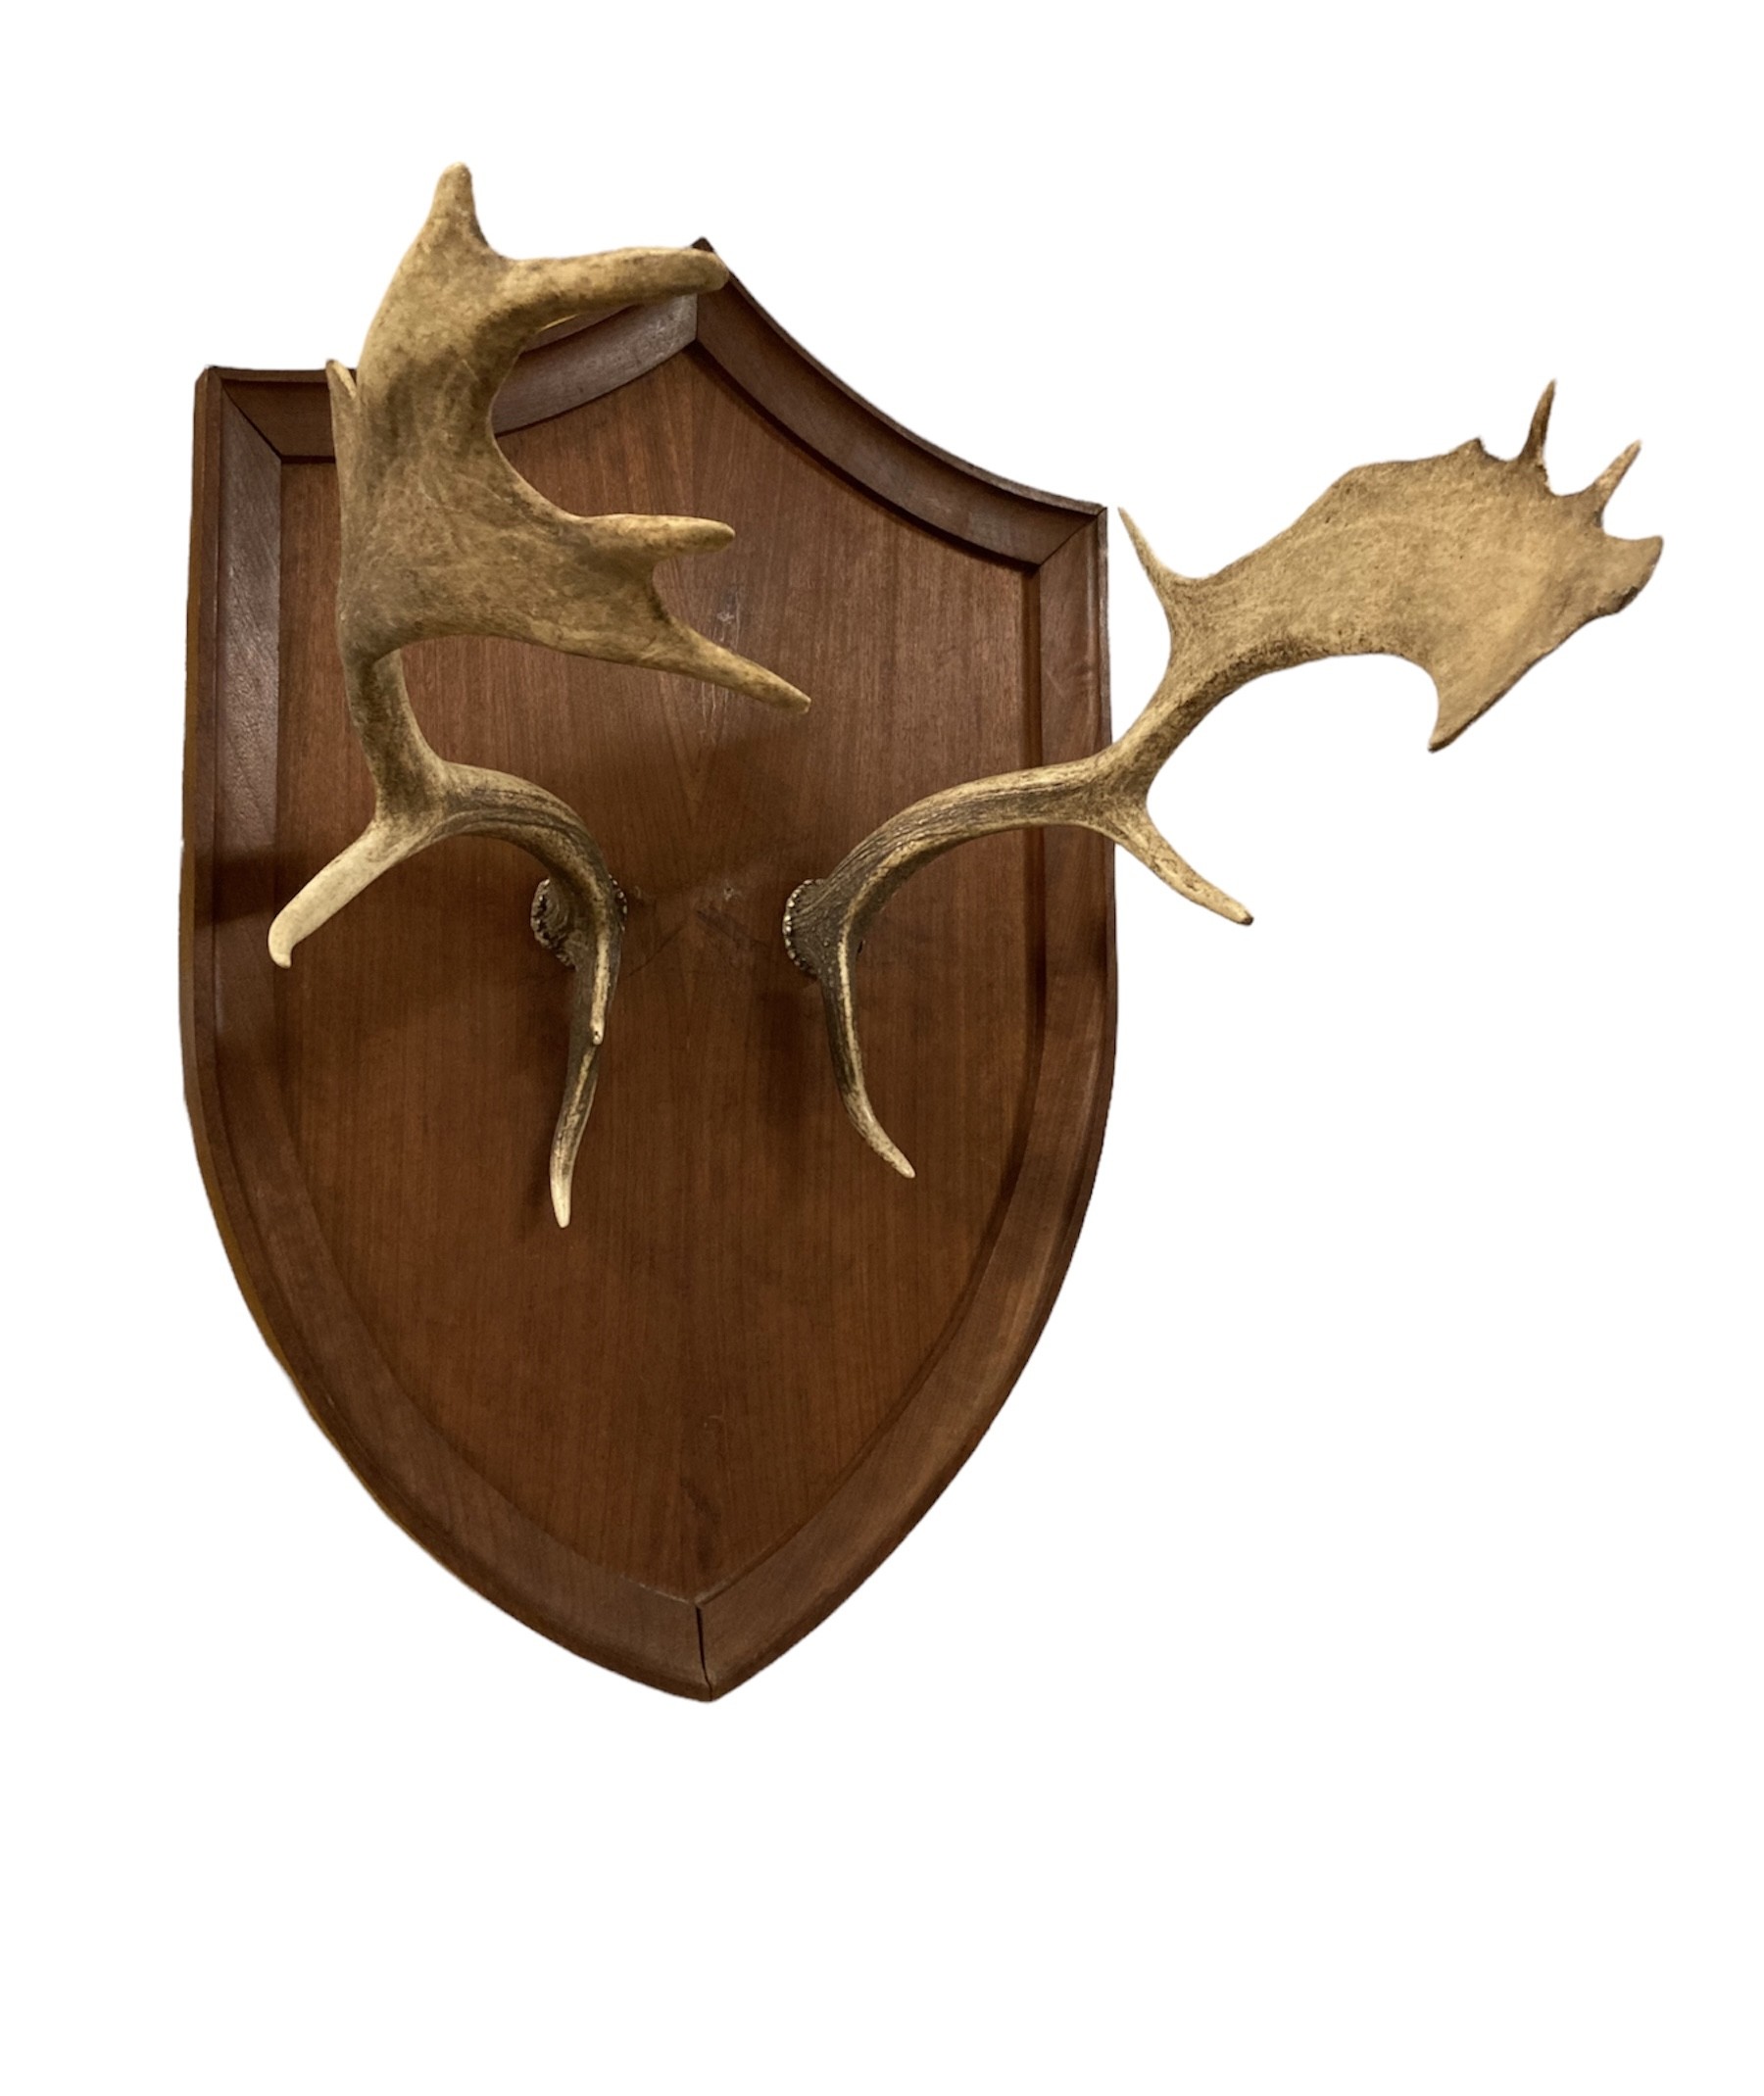 HUNTING TROPHY